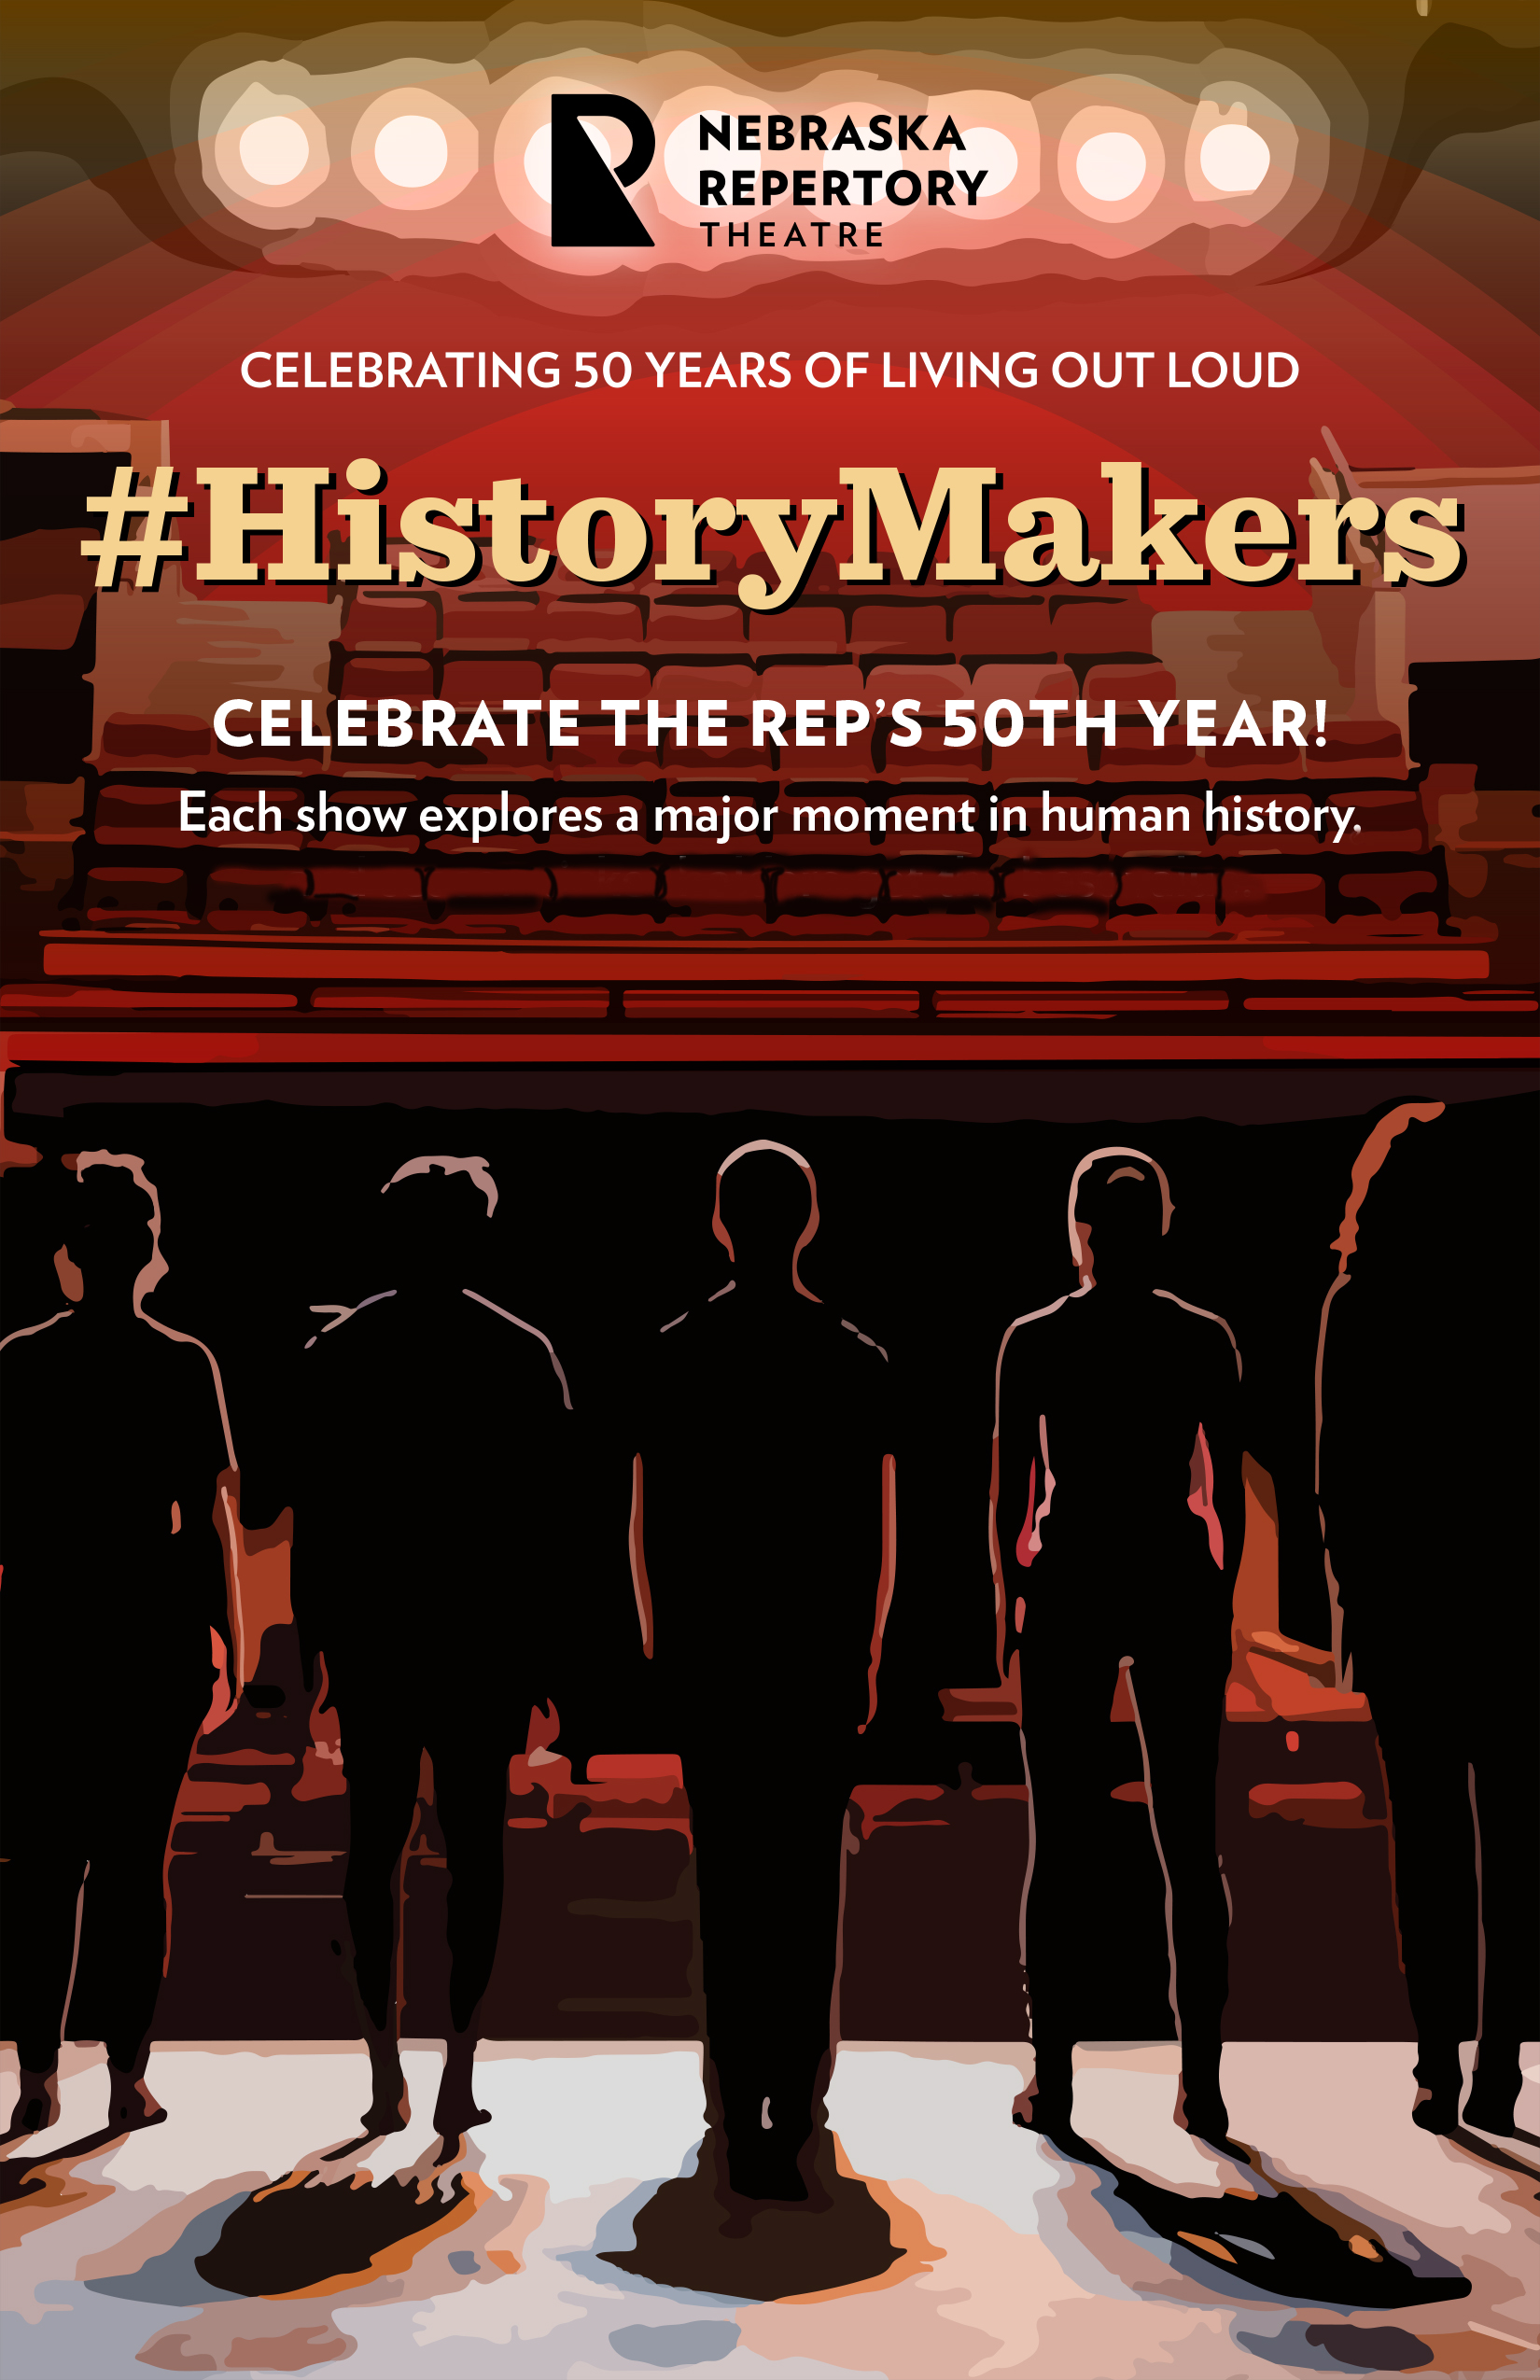 The Nebraska Repertory Theatre's 50th season in 2018-2019 is titled "History Makers." Season tickets are available now.